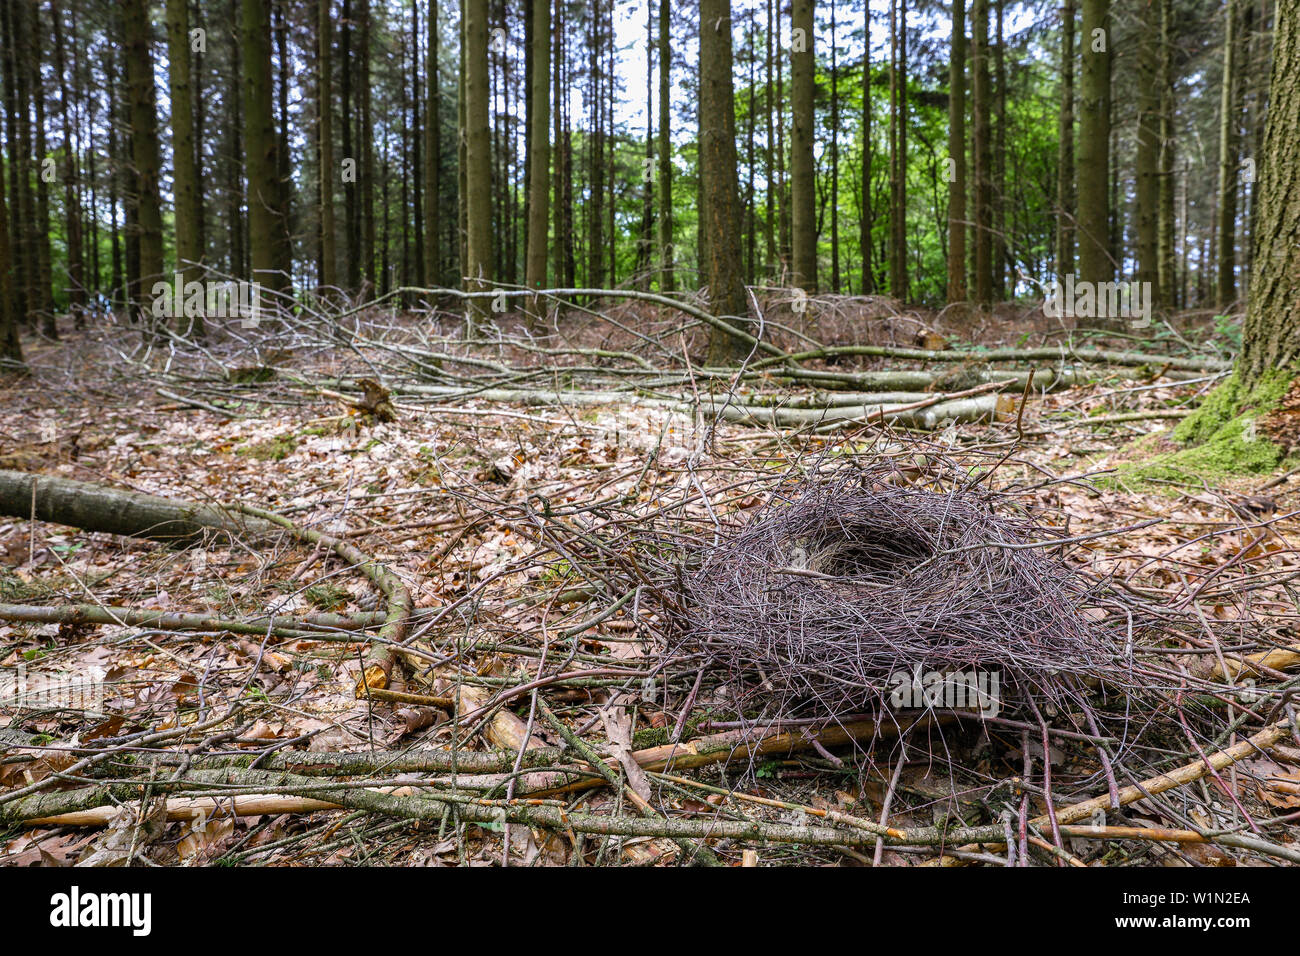 Nest lying on forest ground Stock Photo